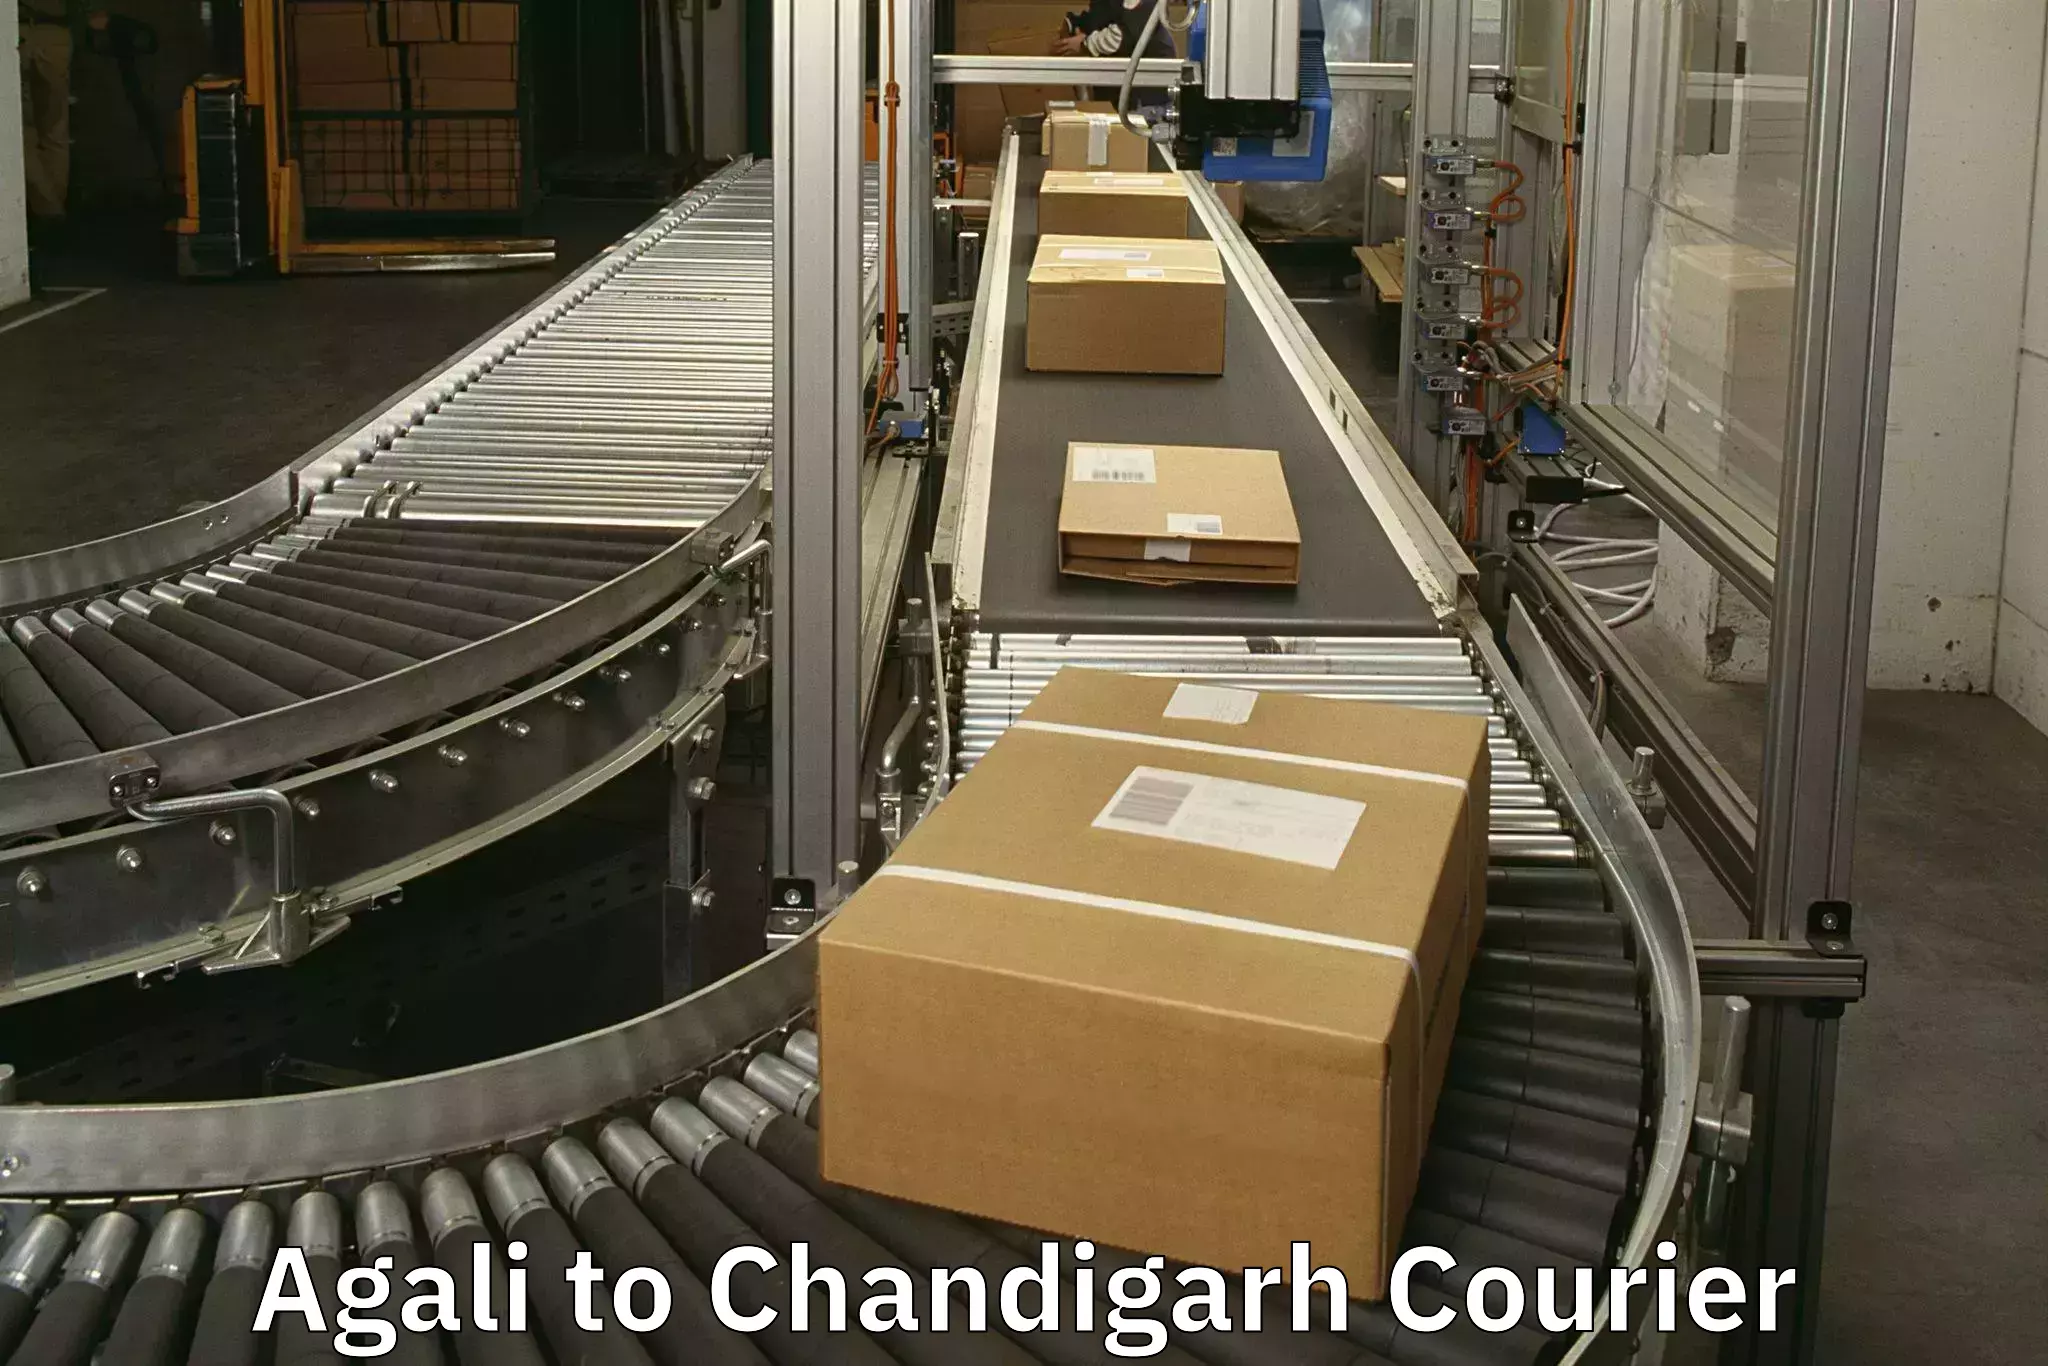 Instant baggage transport quote Agali to Chandigarh